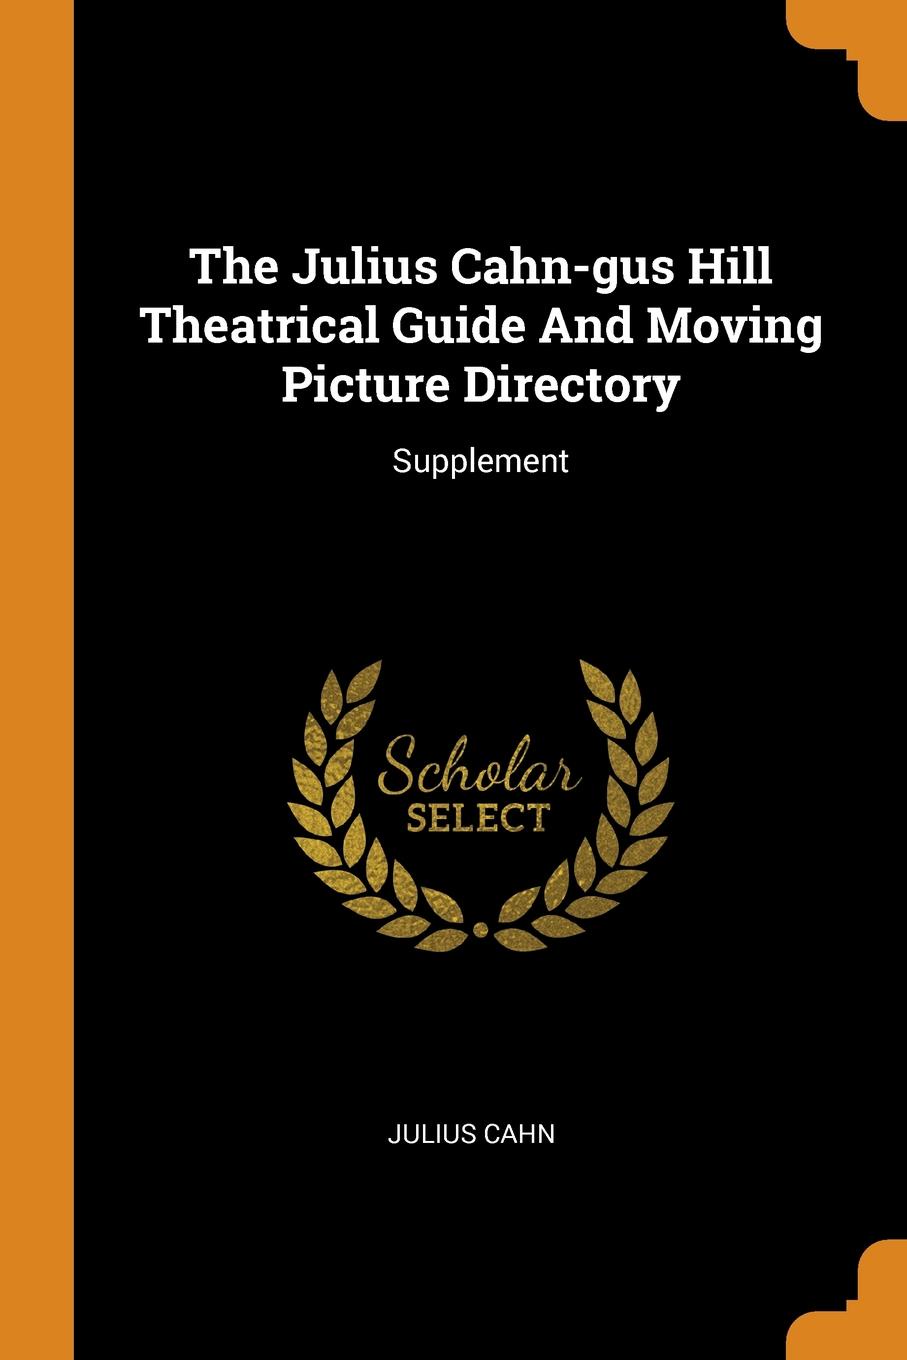 The Julius Cahn-gus Hill Theatrical Guide And Moving Picture Directory. Supplement